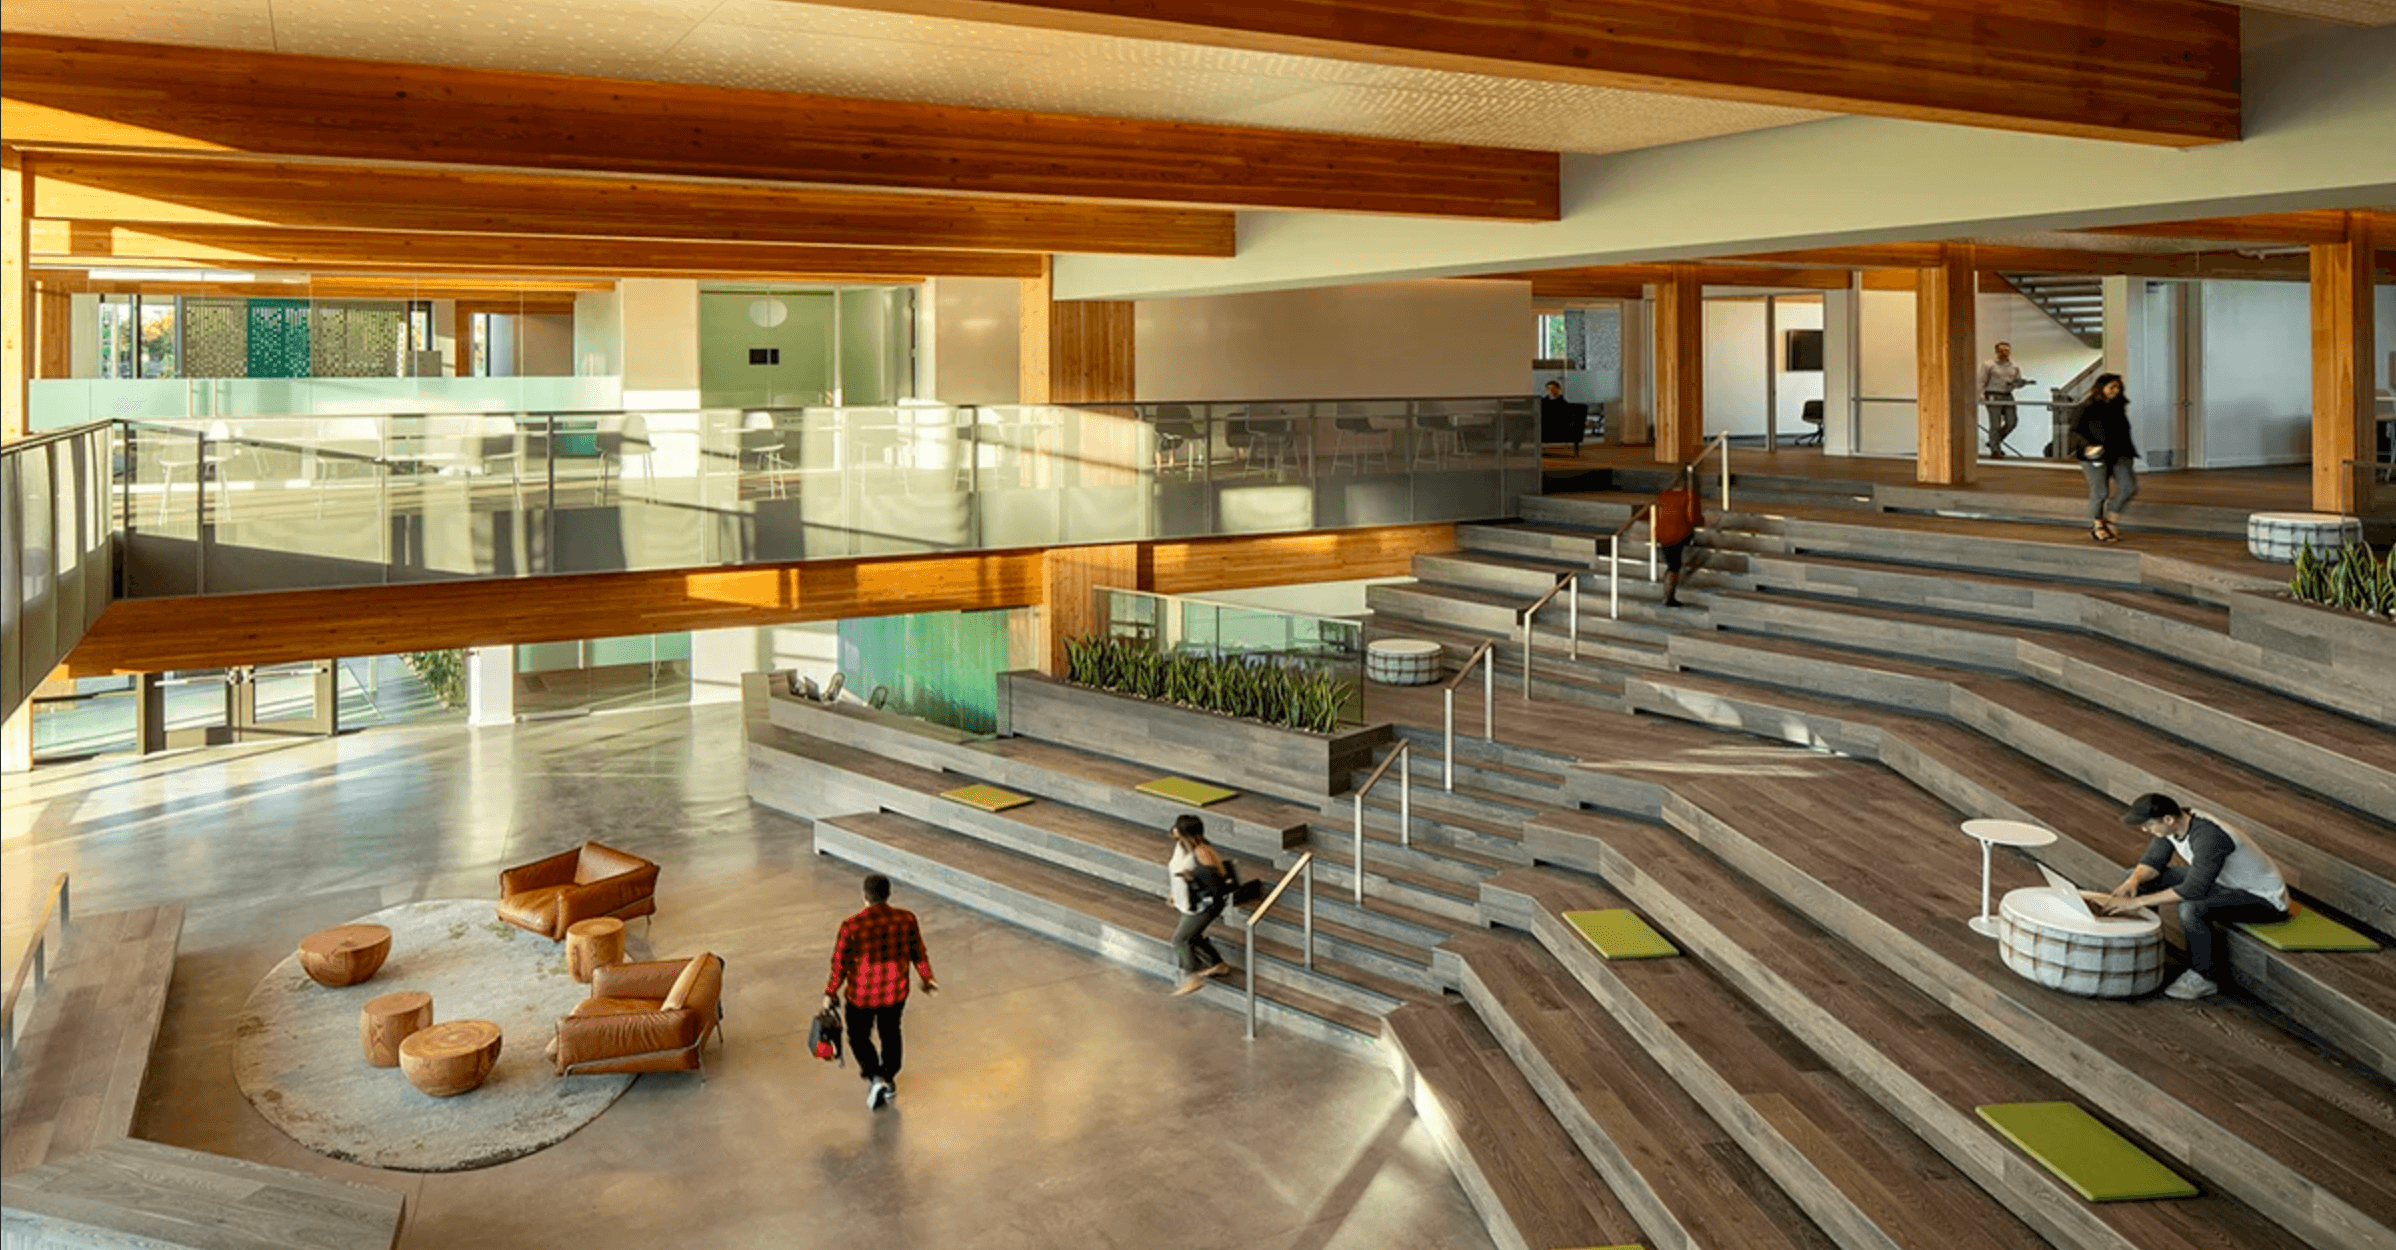 Mass Timber Poised to Dominate the Sustainable Construction Industry